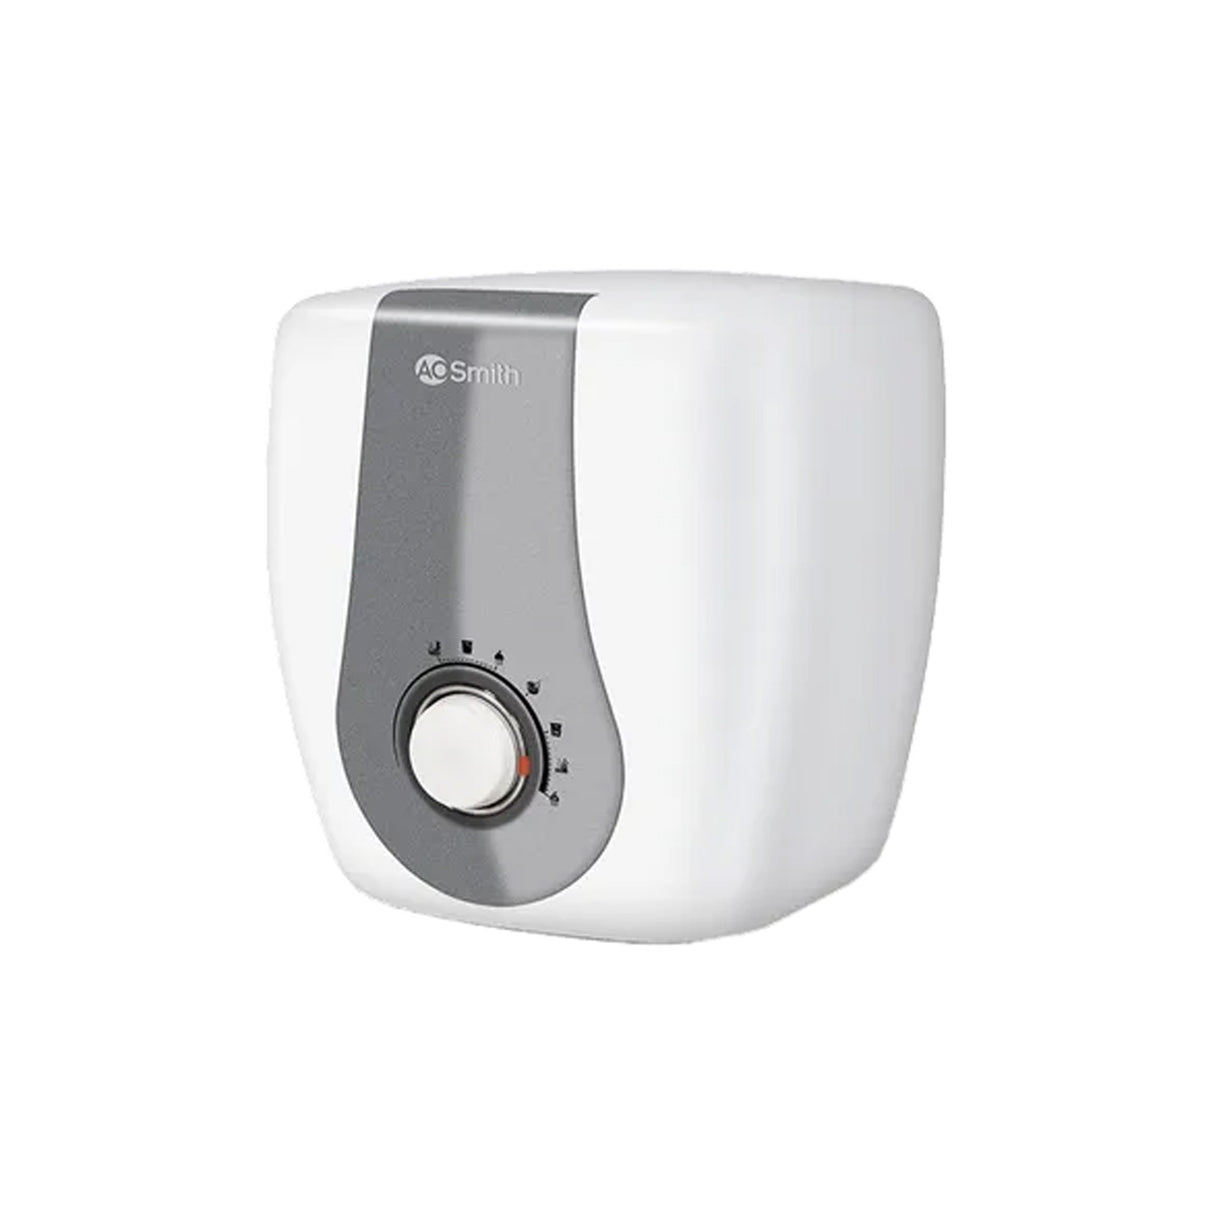 White AO Smith Finesse 15L Water Geyser – 5-Star Rated and Efficient Water Heater.